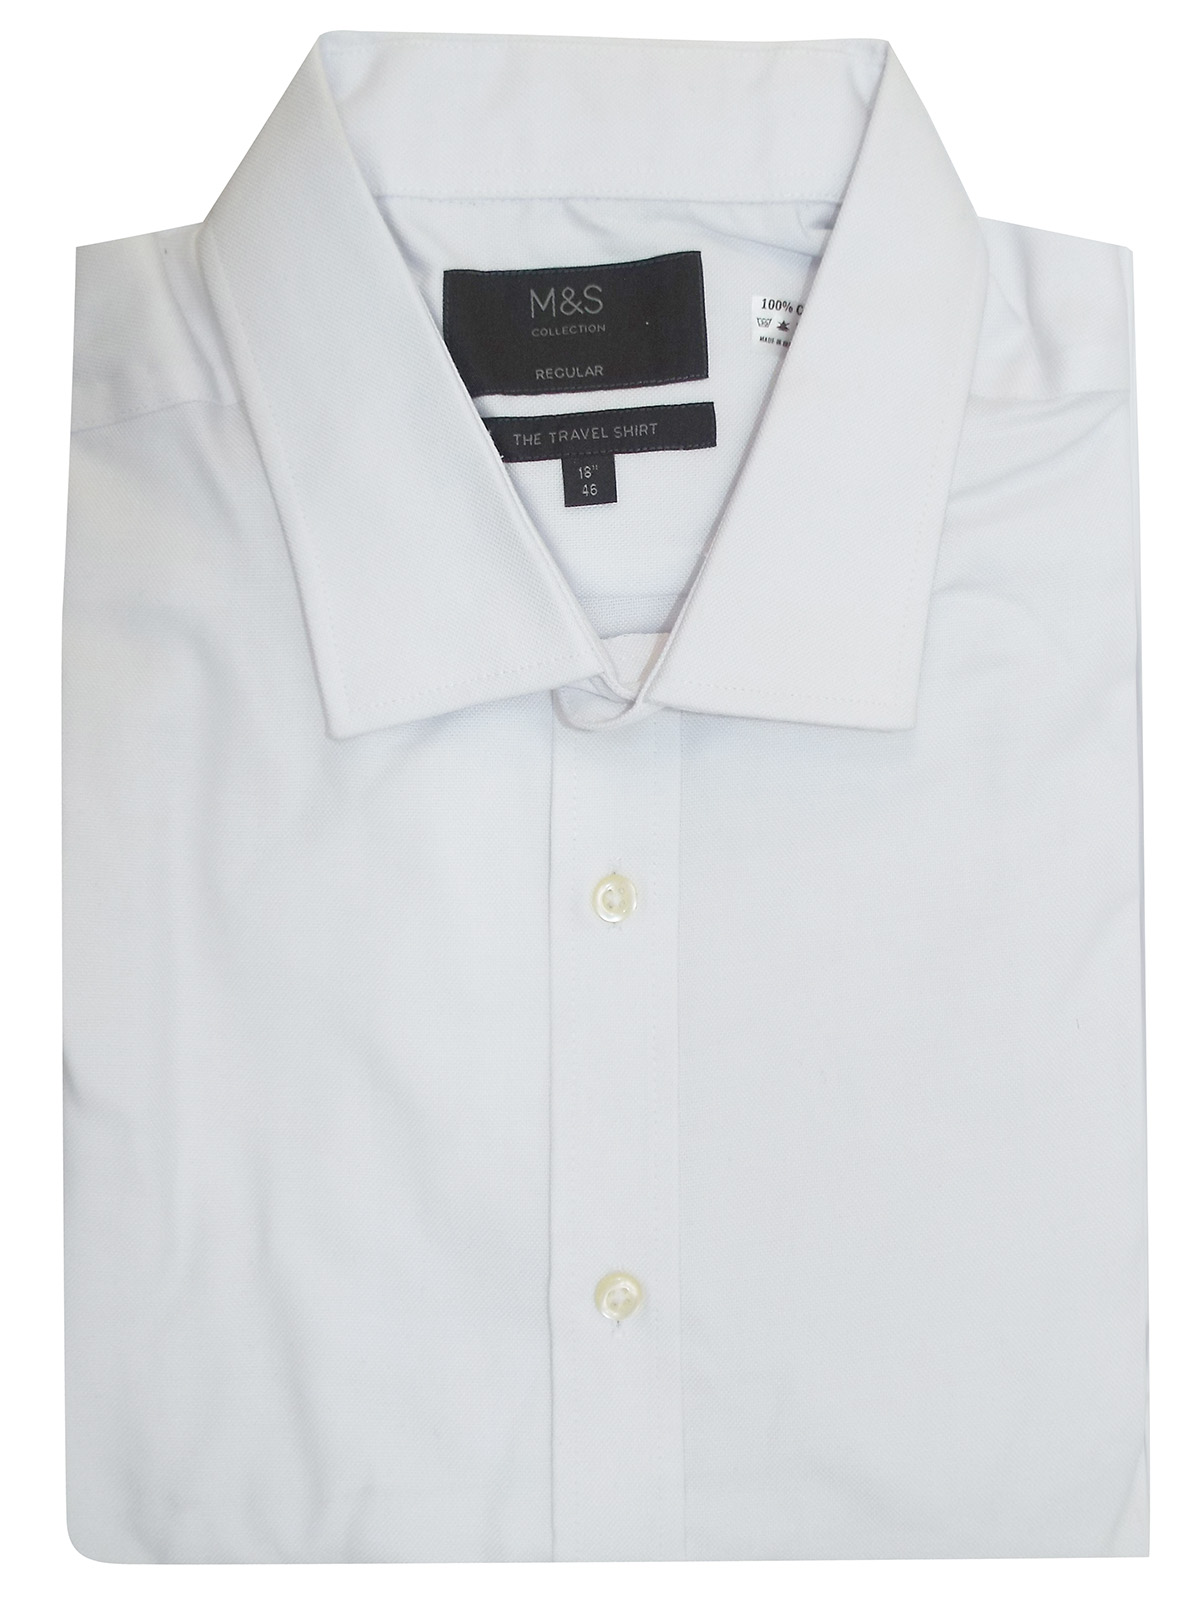 Marks and Spencer - - M&5 WHITE Pure Cotton Long Sleeve Shirt - Collar ...